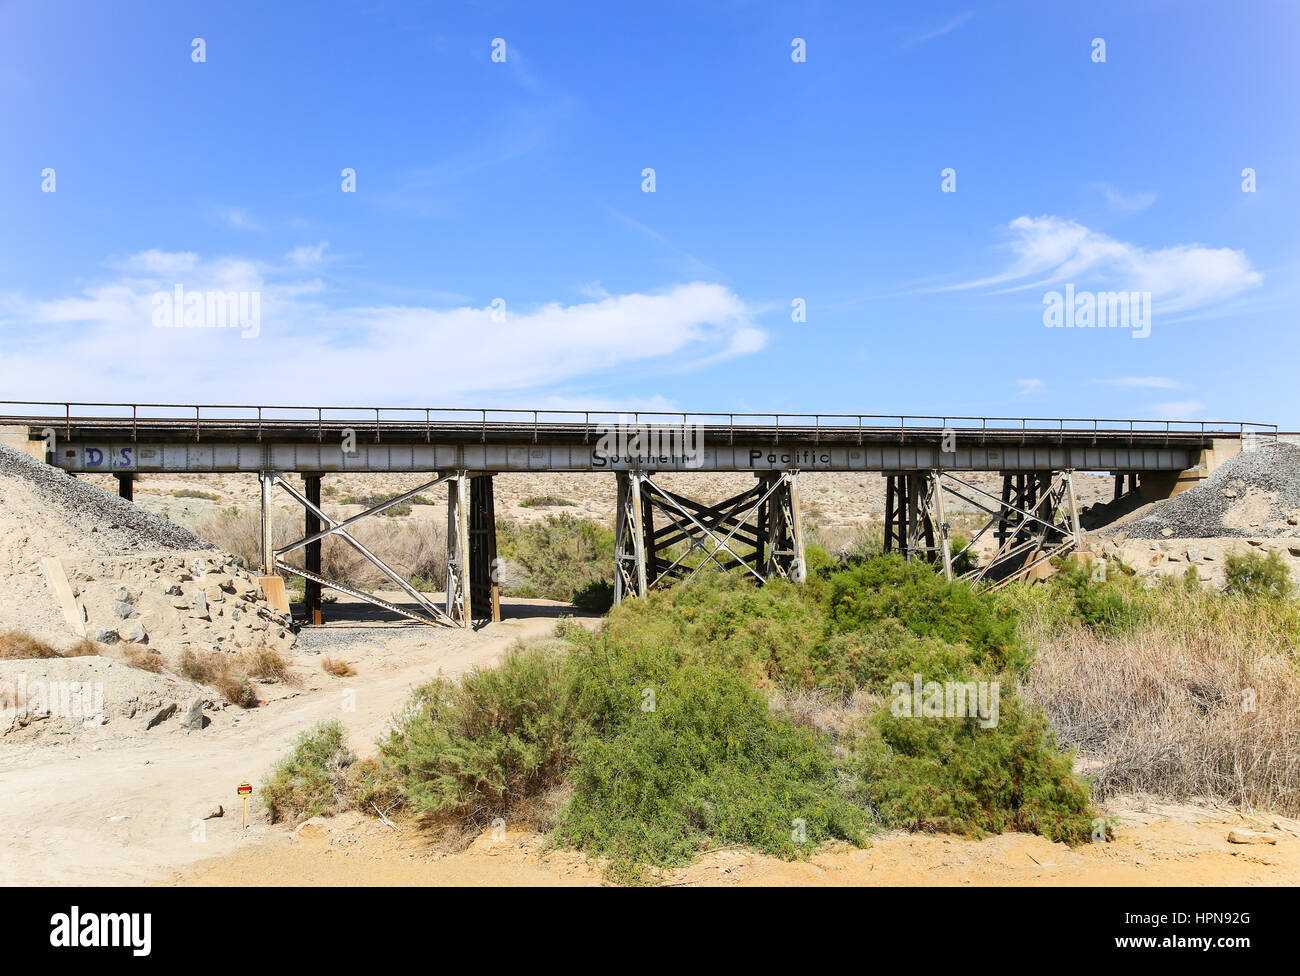 Durmid, California, USA - May 26, 2015: Rail bridge next to California State Route 111 with the logo of the former railroad company Southern Pacific. Stock Photo